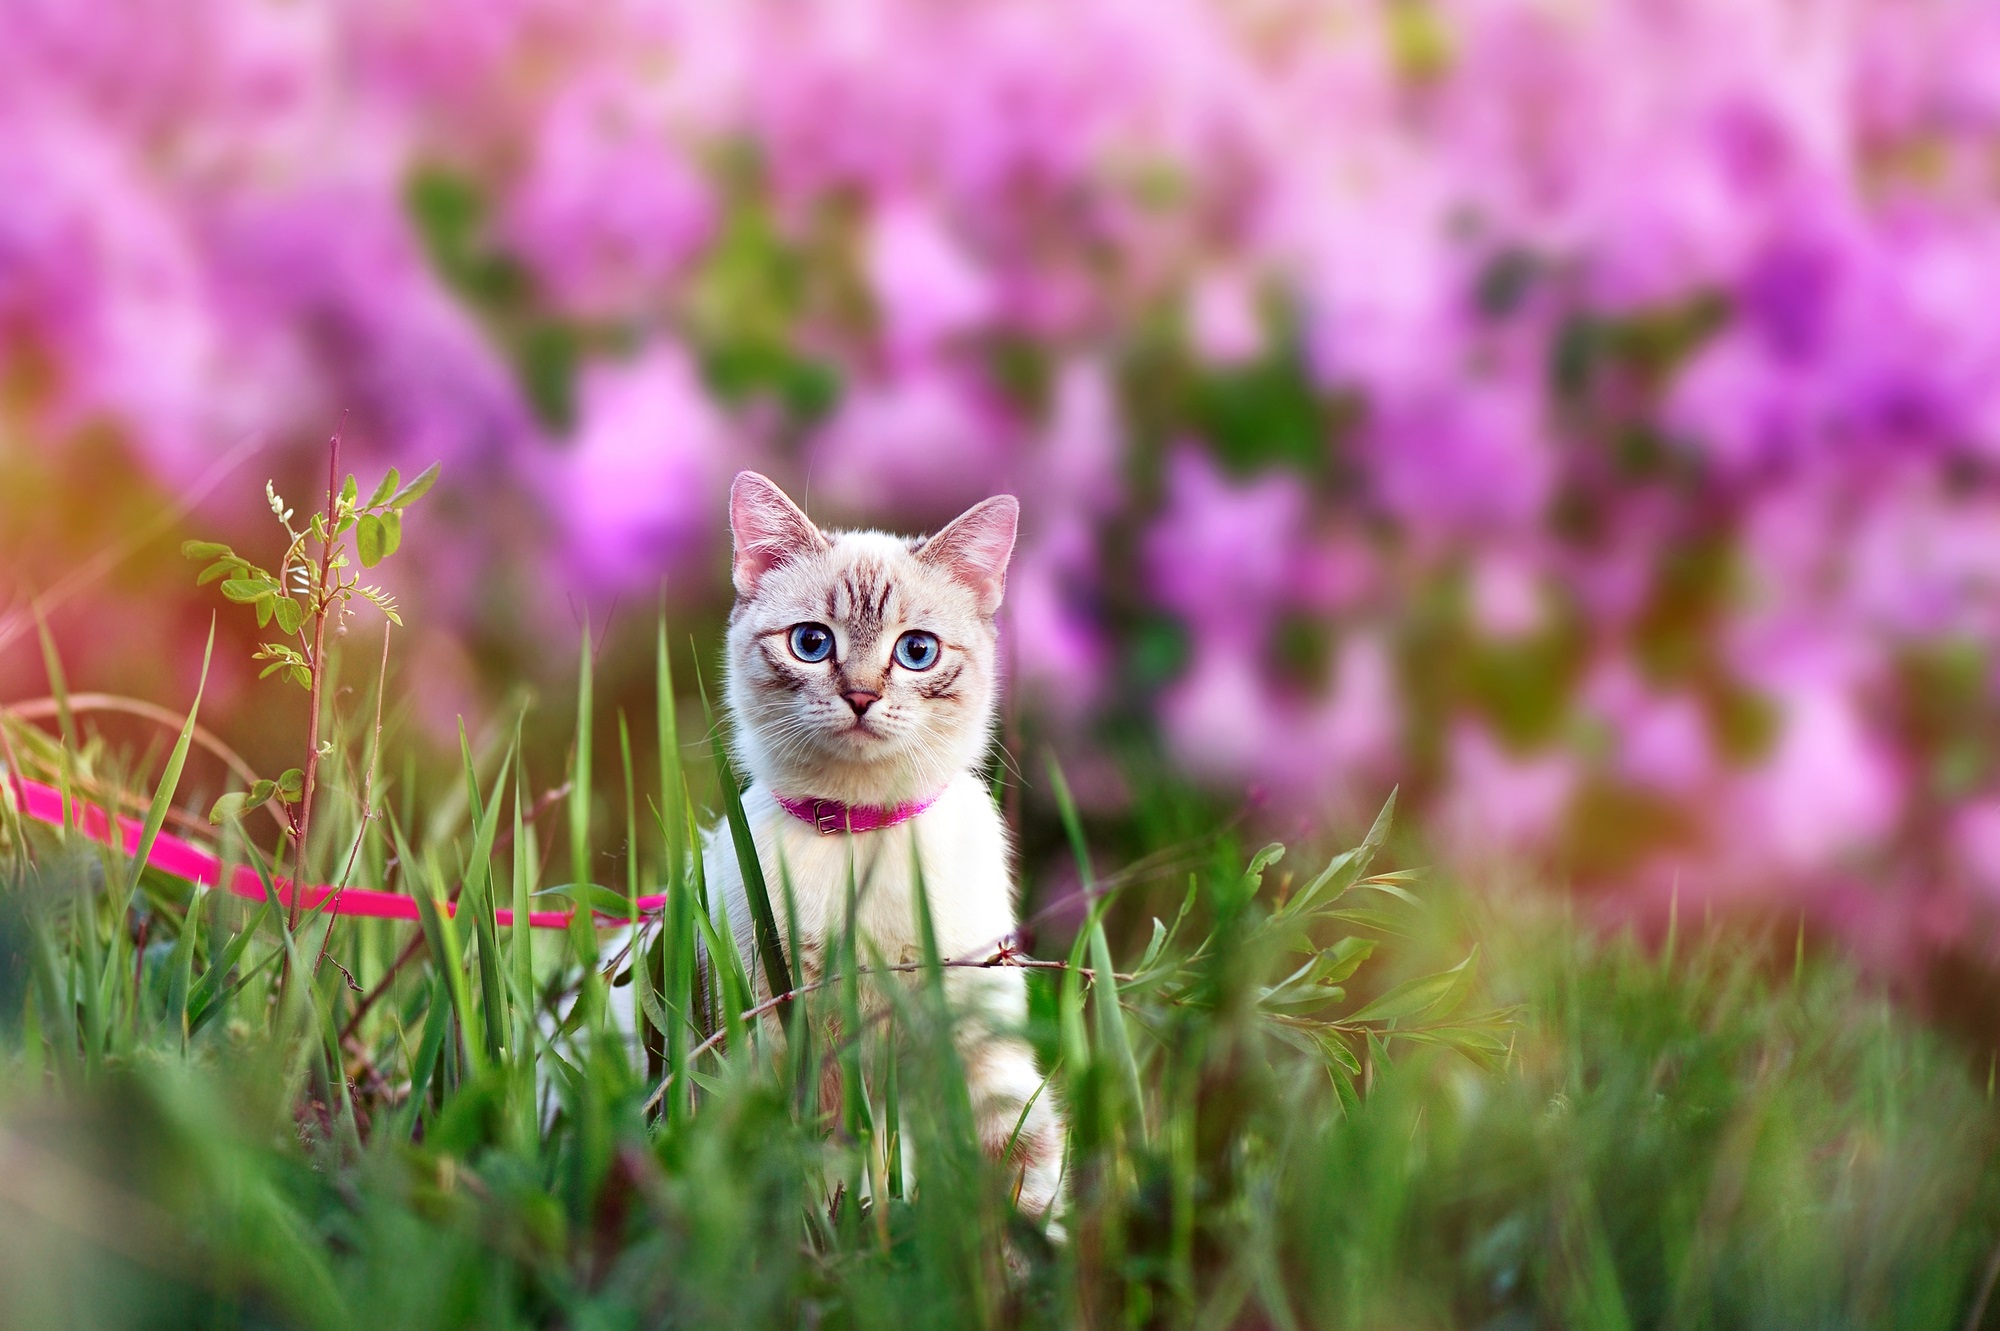 White cat on a red leash outdoors on a lawn full of pink lilac flowers